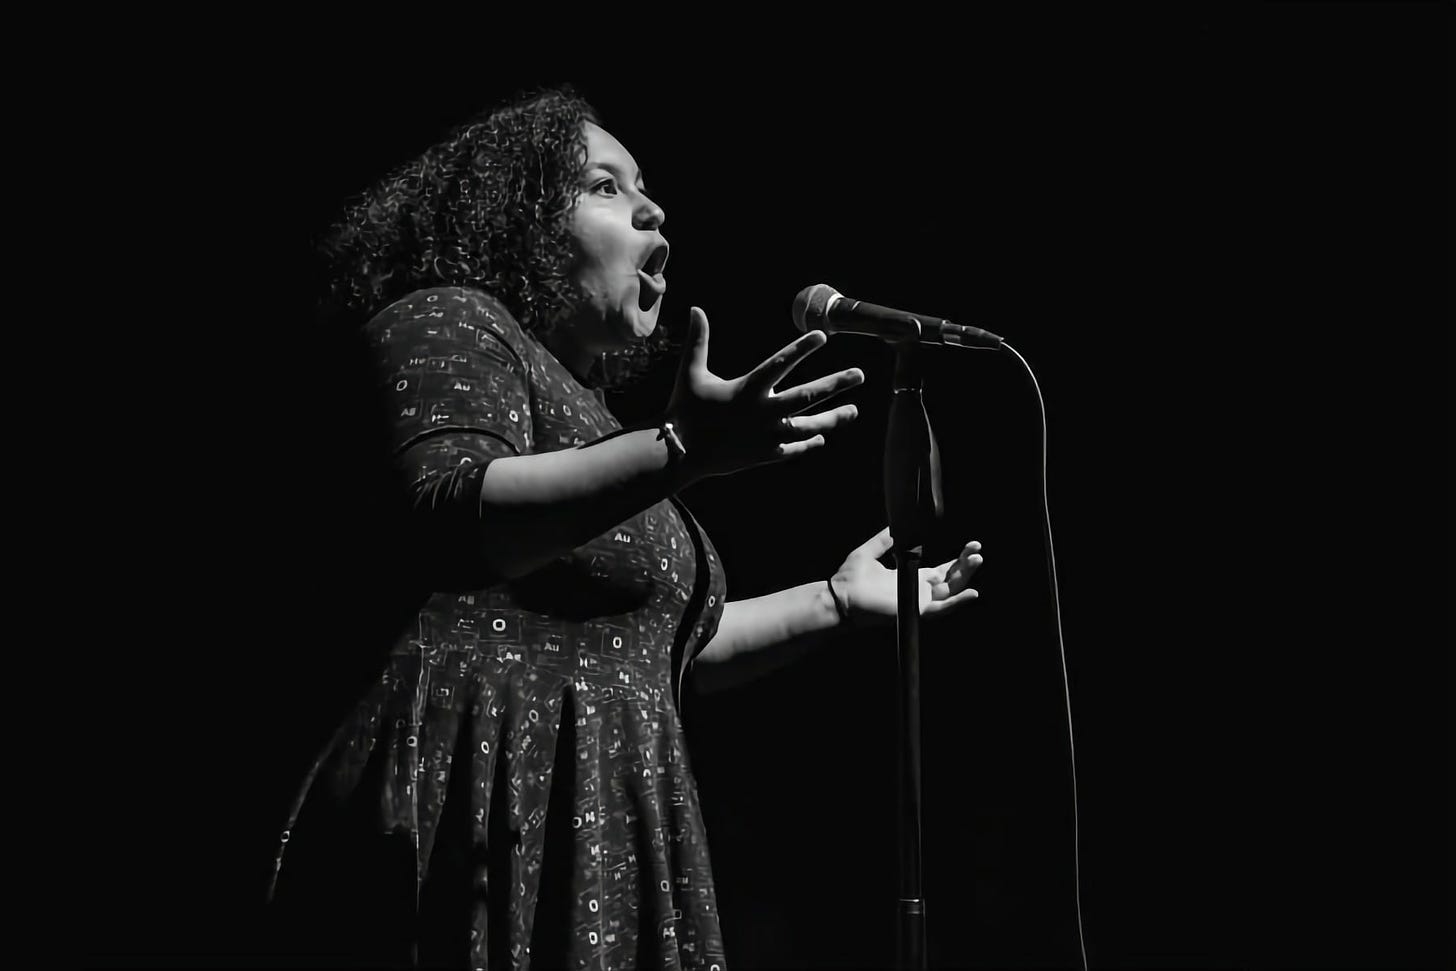 The image is a black and white photograph capturing poet Georgia Bartlett-McNeil in a moment of performance. She is positioned before a microphone, animatedly expressing herself with her mouth open as if caught mid-sentence, hands gesturing to emphasise her spoken word. The lighting casts her in a soft glow against a dark backdrop, highlighting the passion and intensity of her performance.